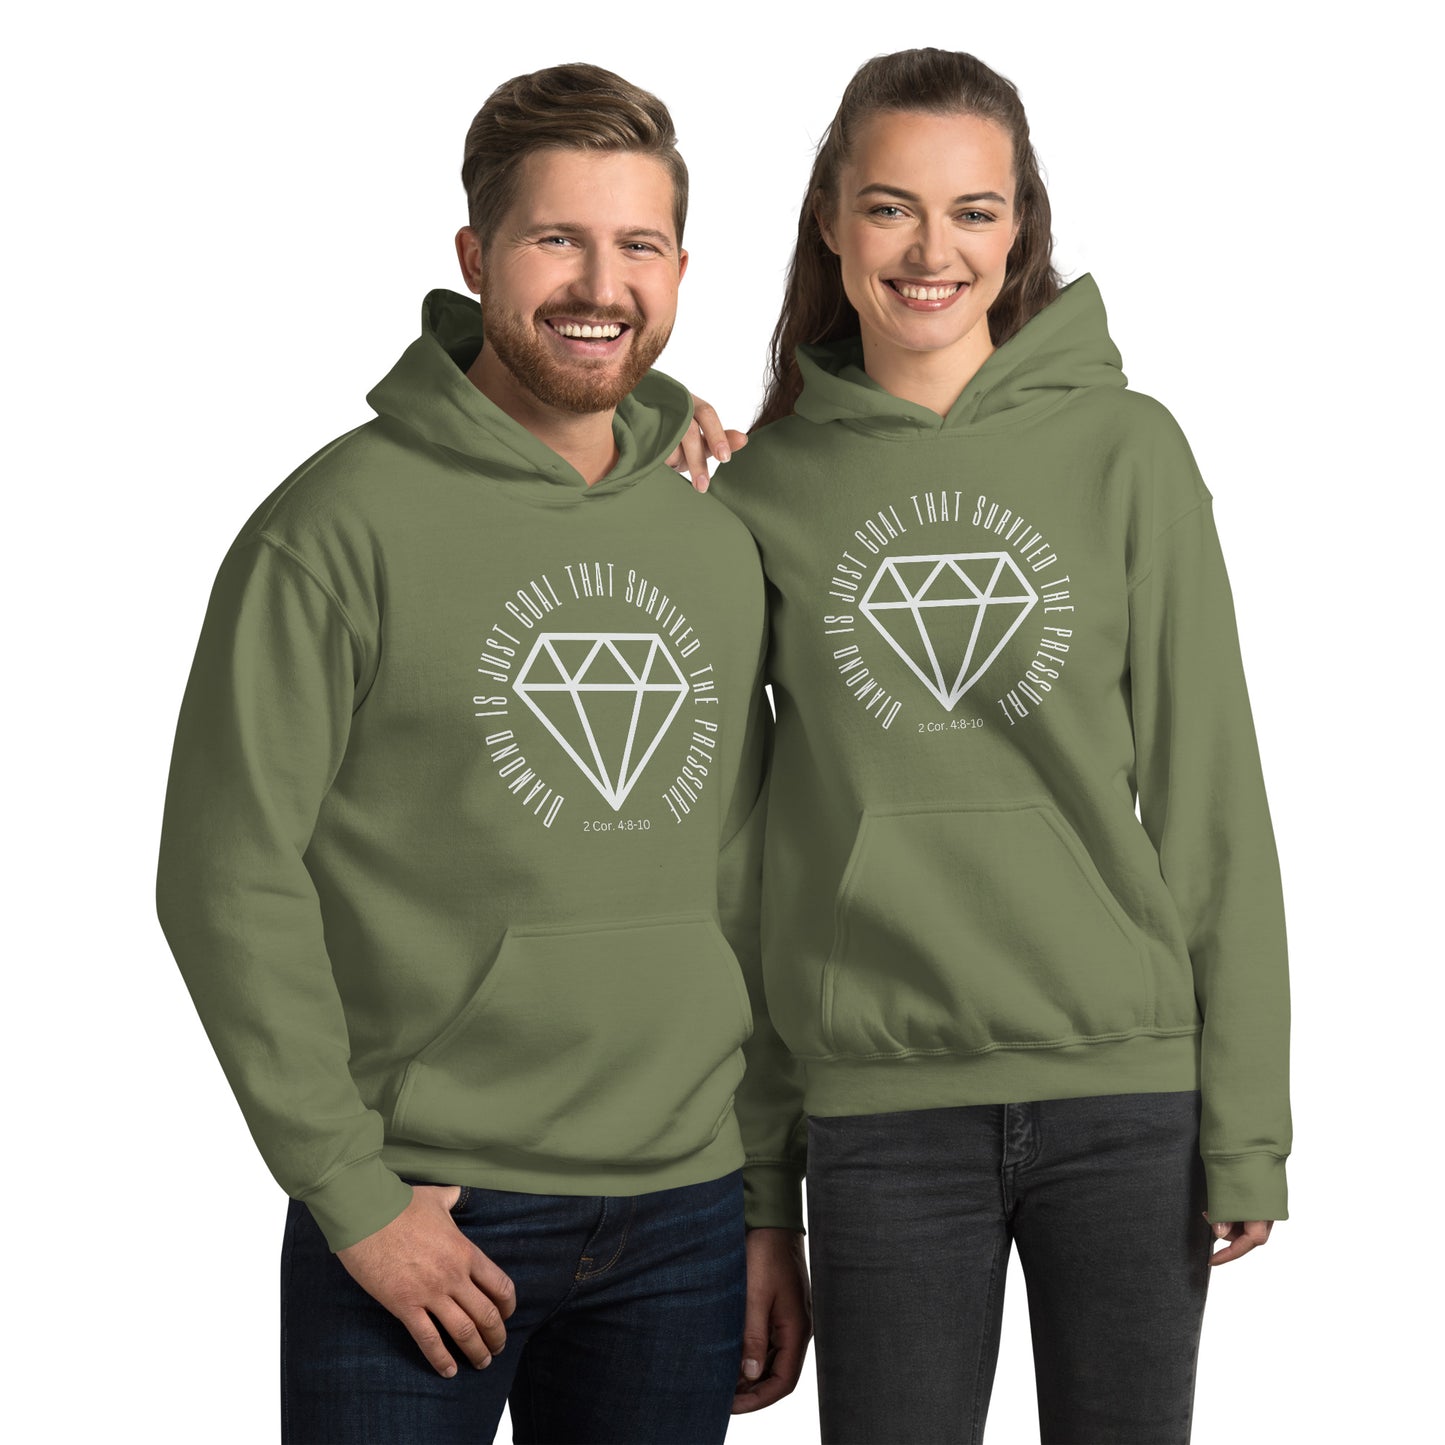 Diamond Is Just Coal That Survived The Pressure 2 Cor. 4:8-10 Unisex Hoodie